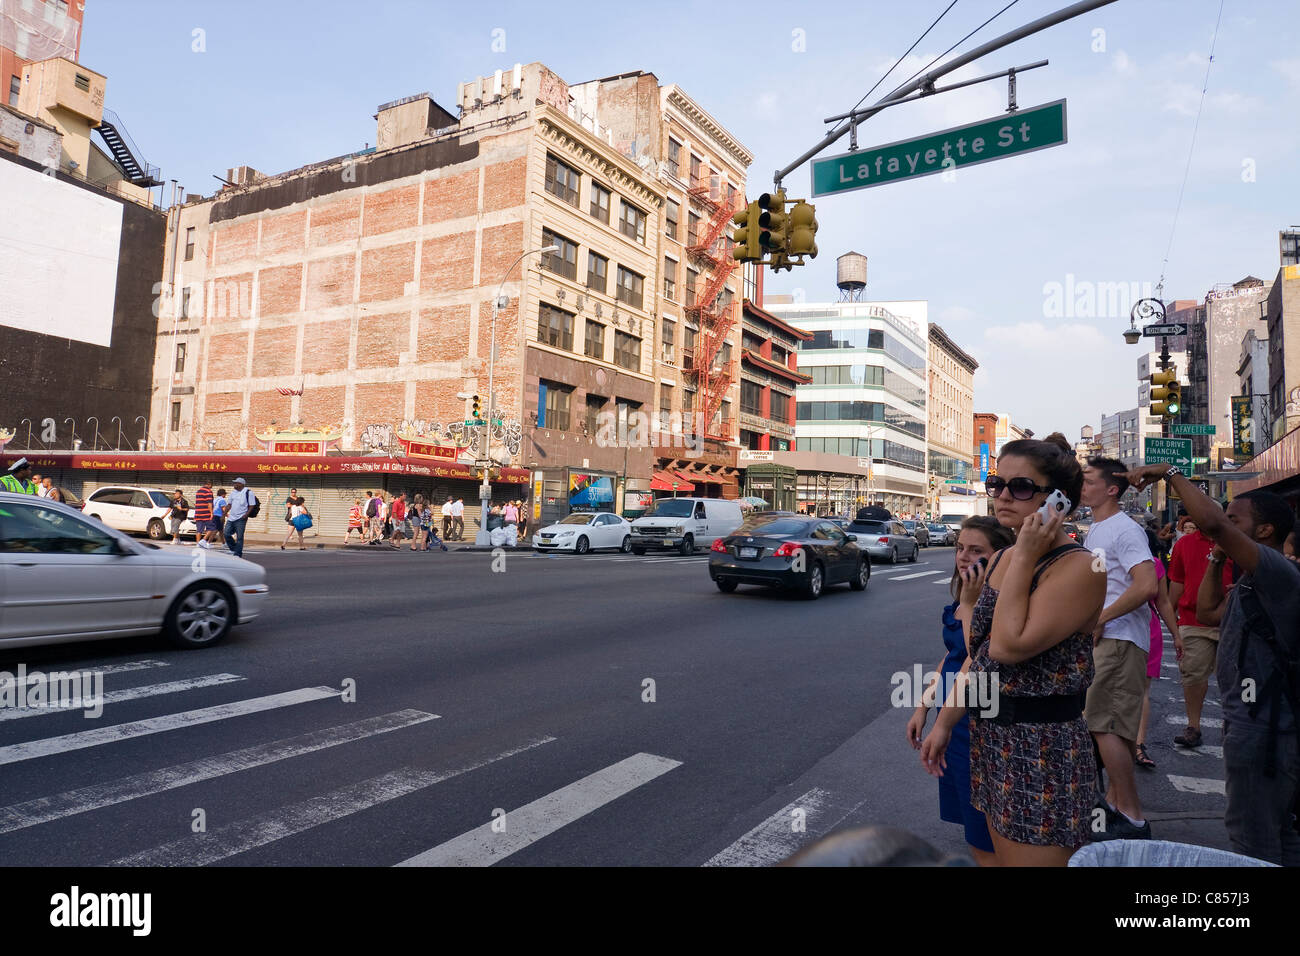 Pedestrians wait to cross the street at the intersection of Lafayette and Canal Street in New York City's Chinatown Stock Photo